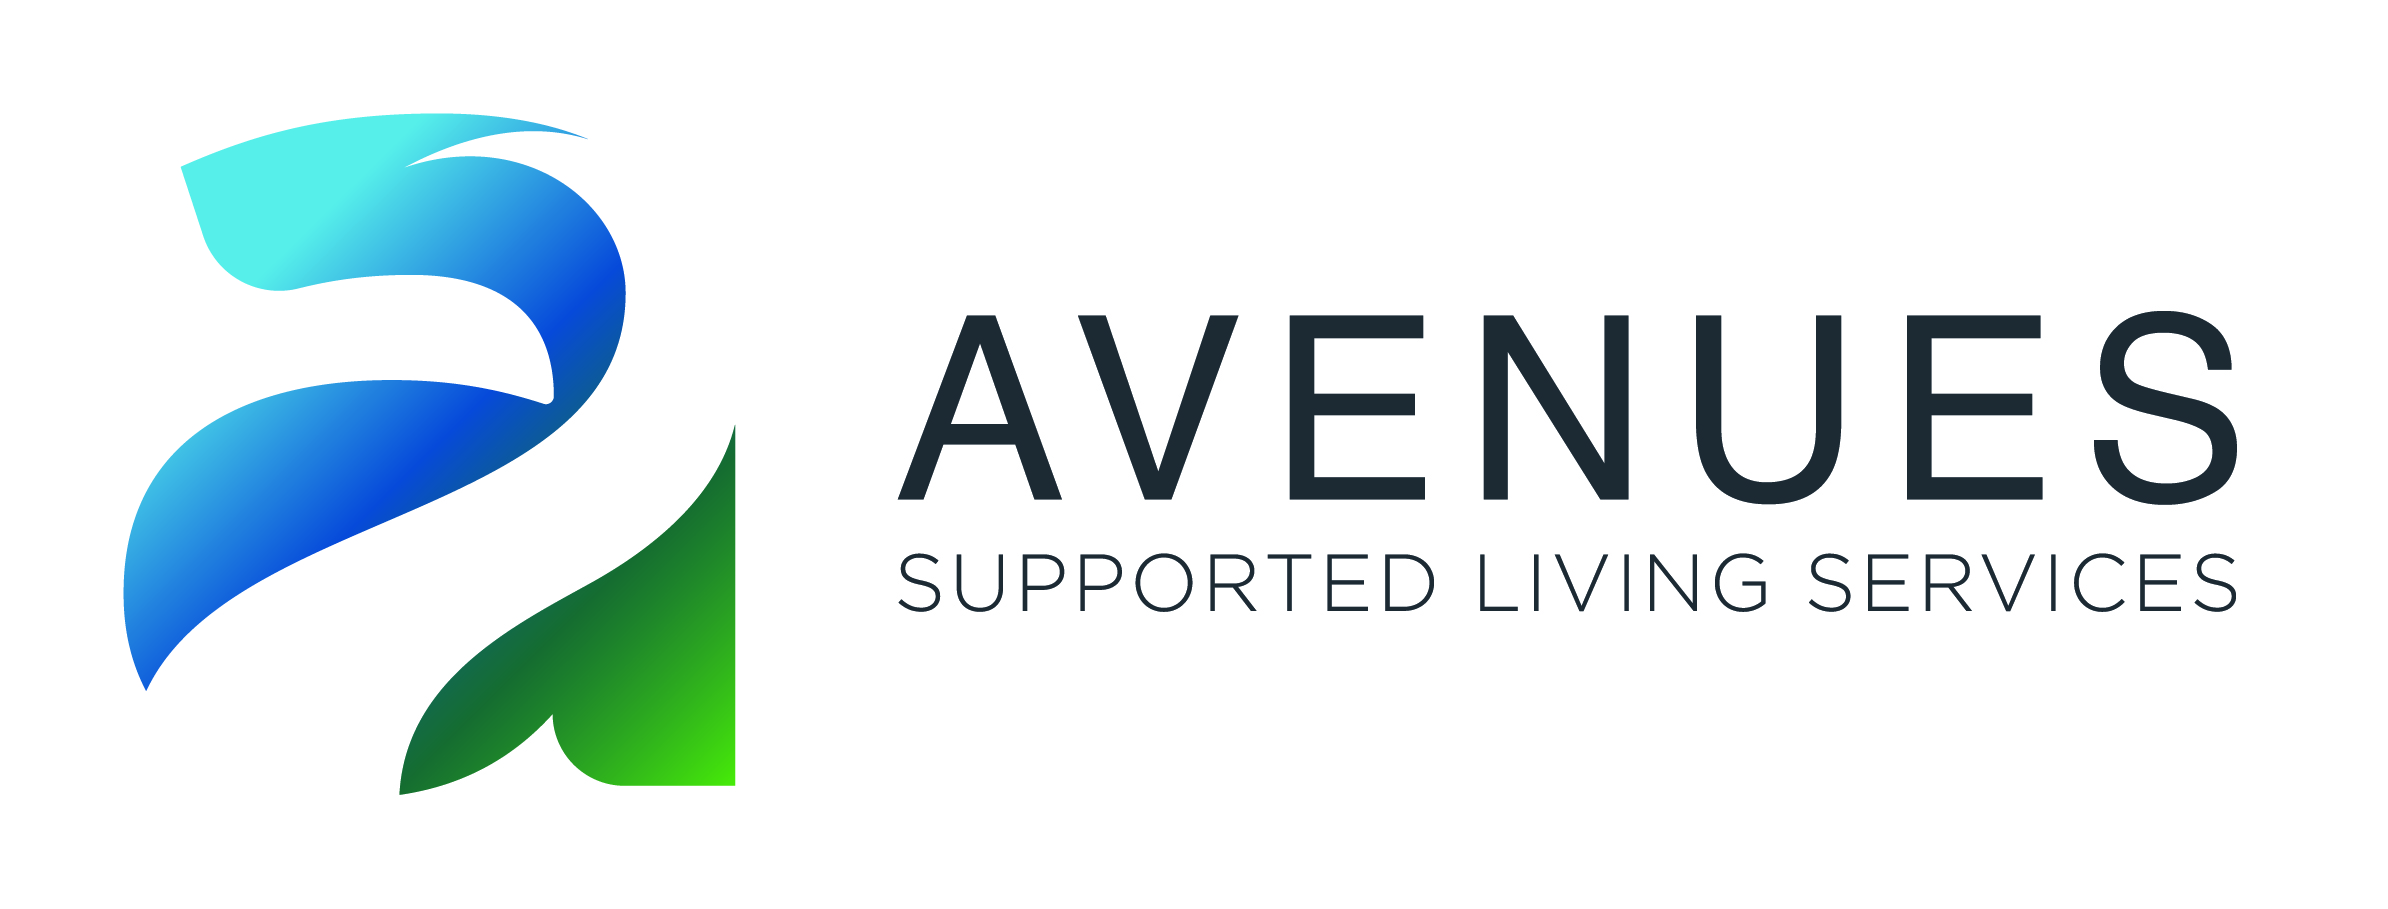 Avenues Supported Living Services